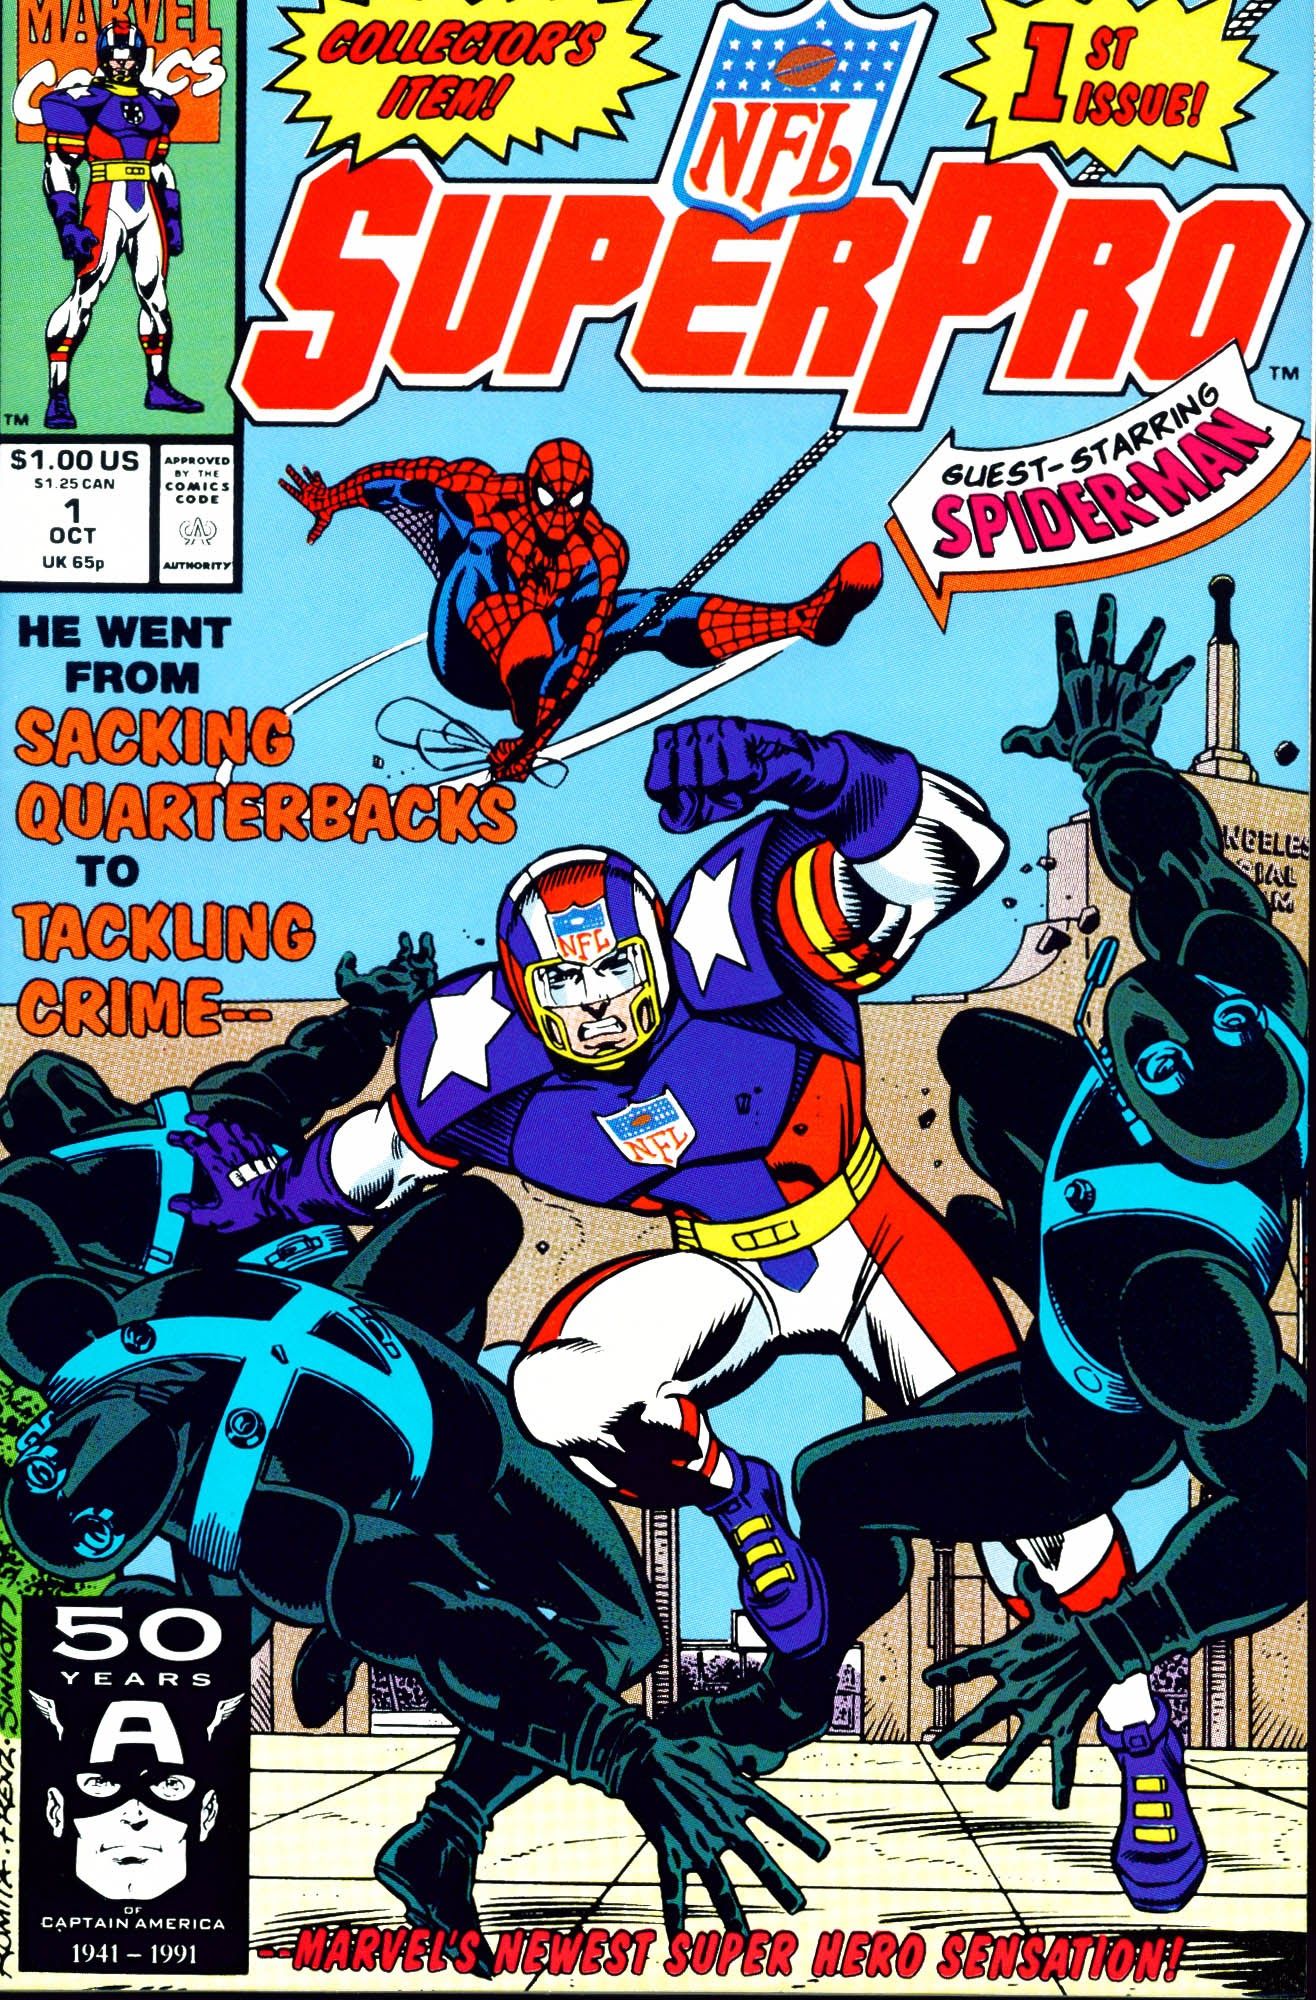 The cover of NFL Super-Pro #1